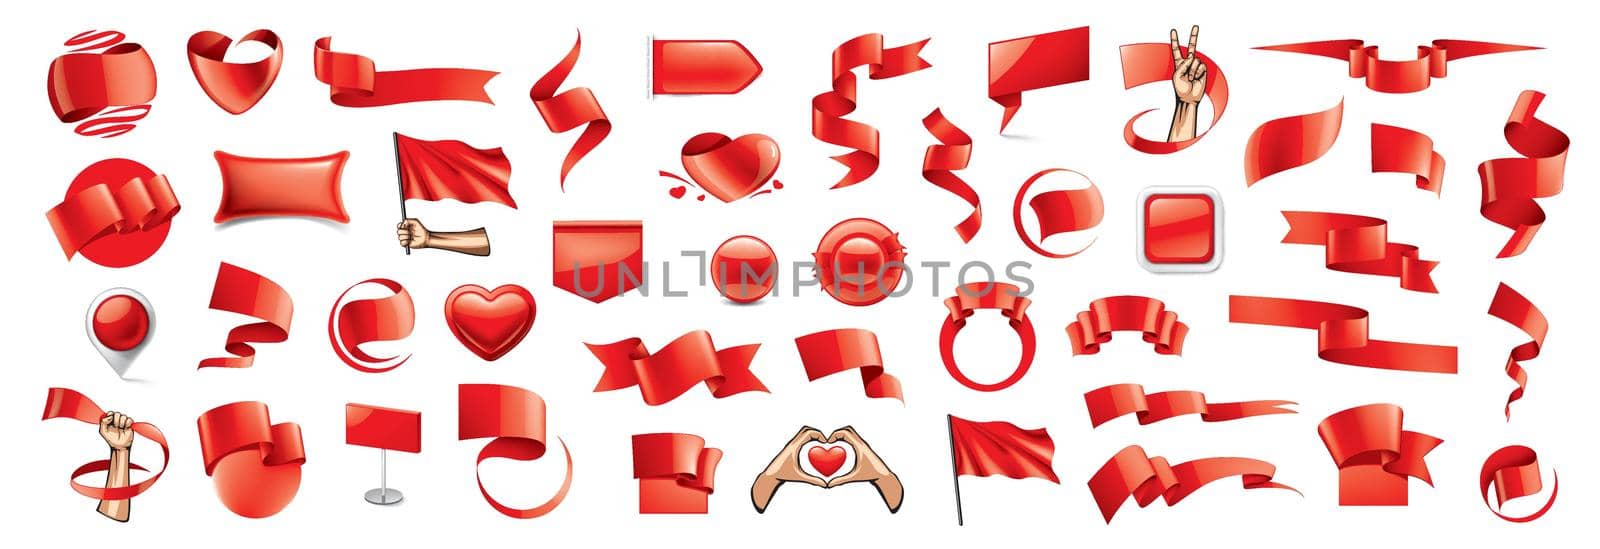 Large vector set of red flags, ribbons and various design elements.